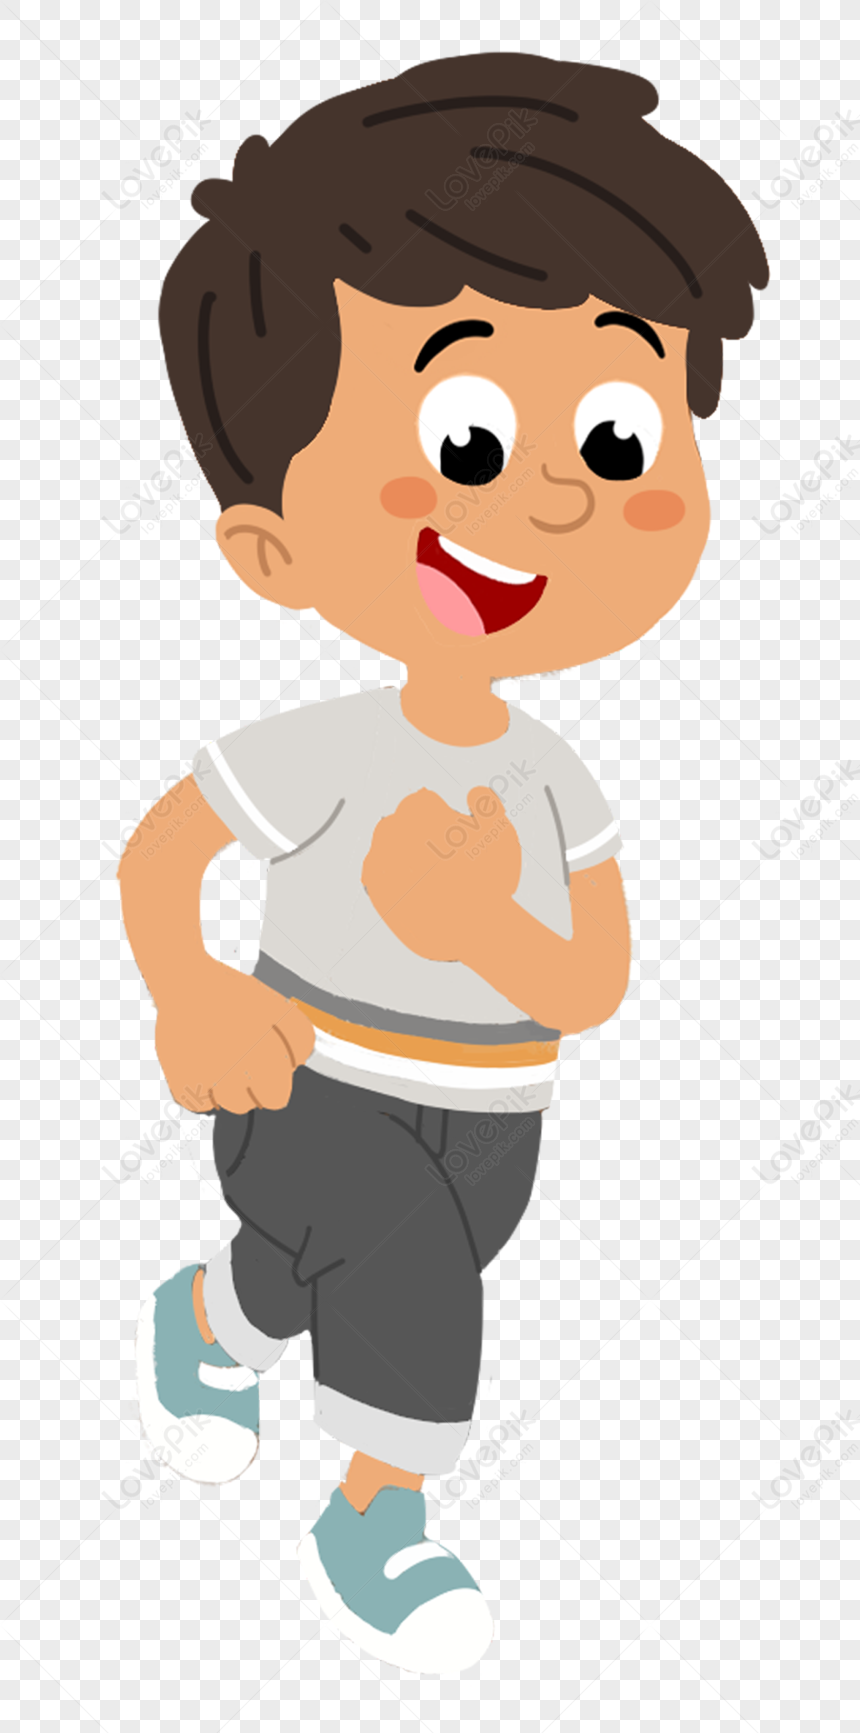 Sports Boy PNG Image And Clipart Image For Free Download - Lovepik ...